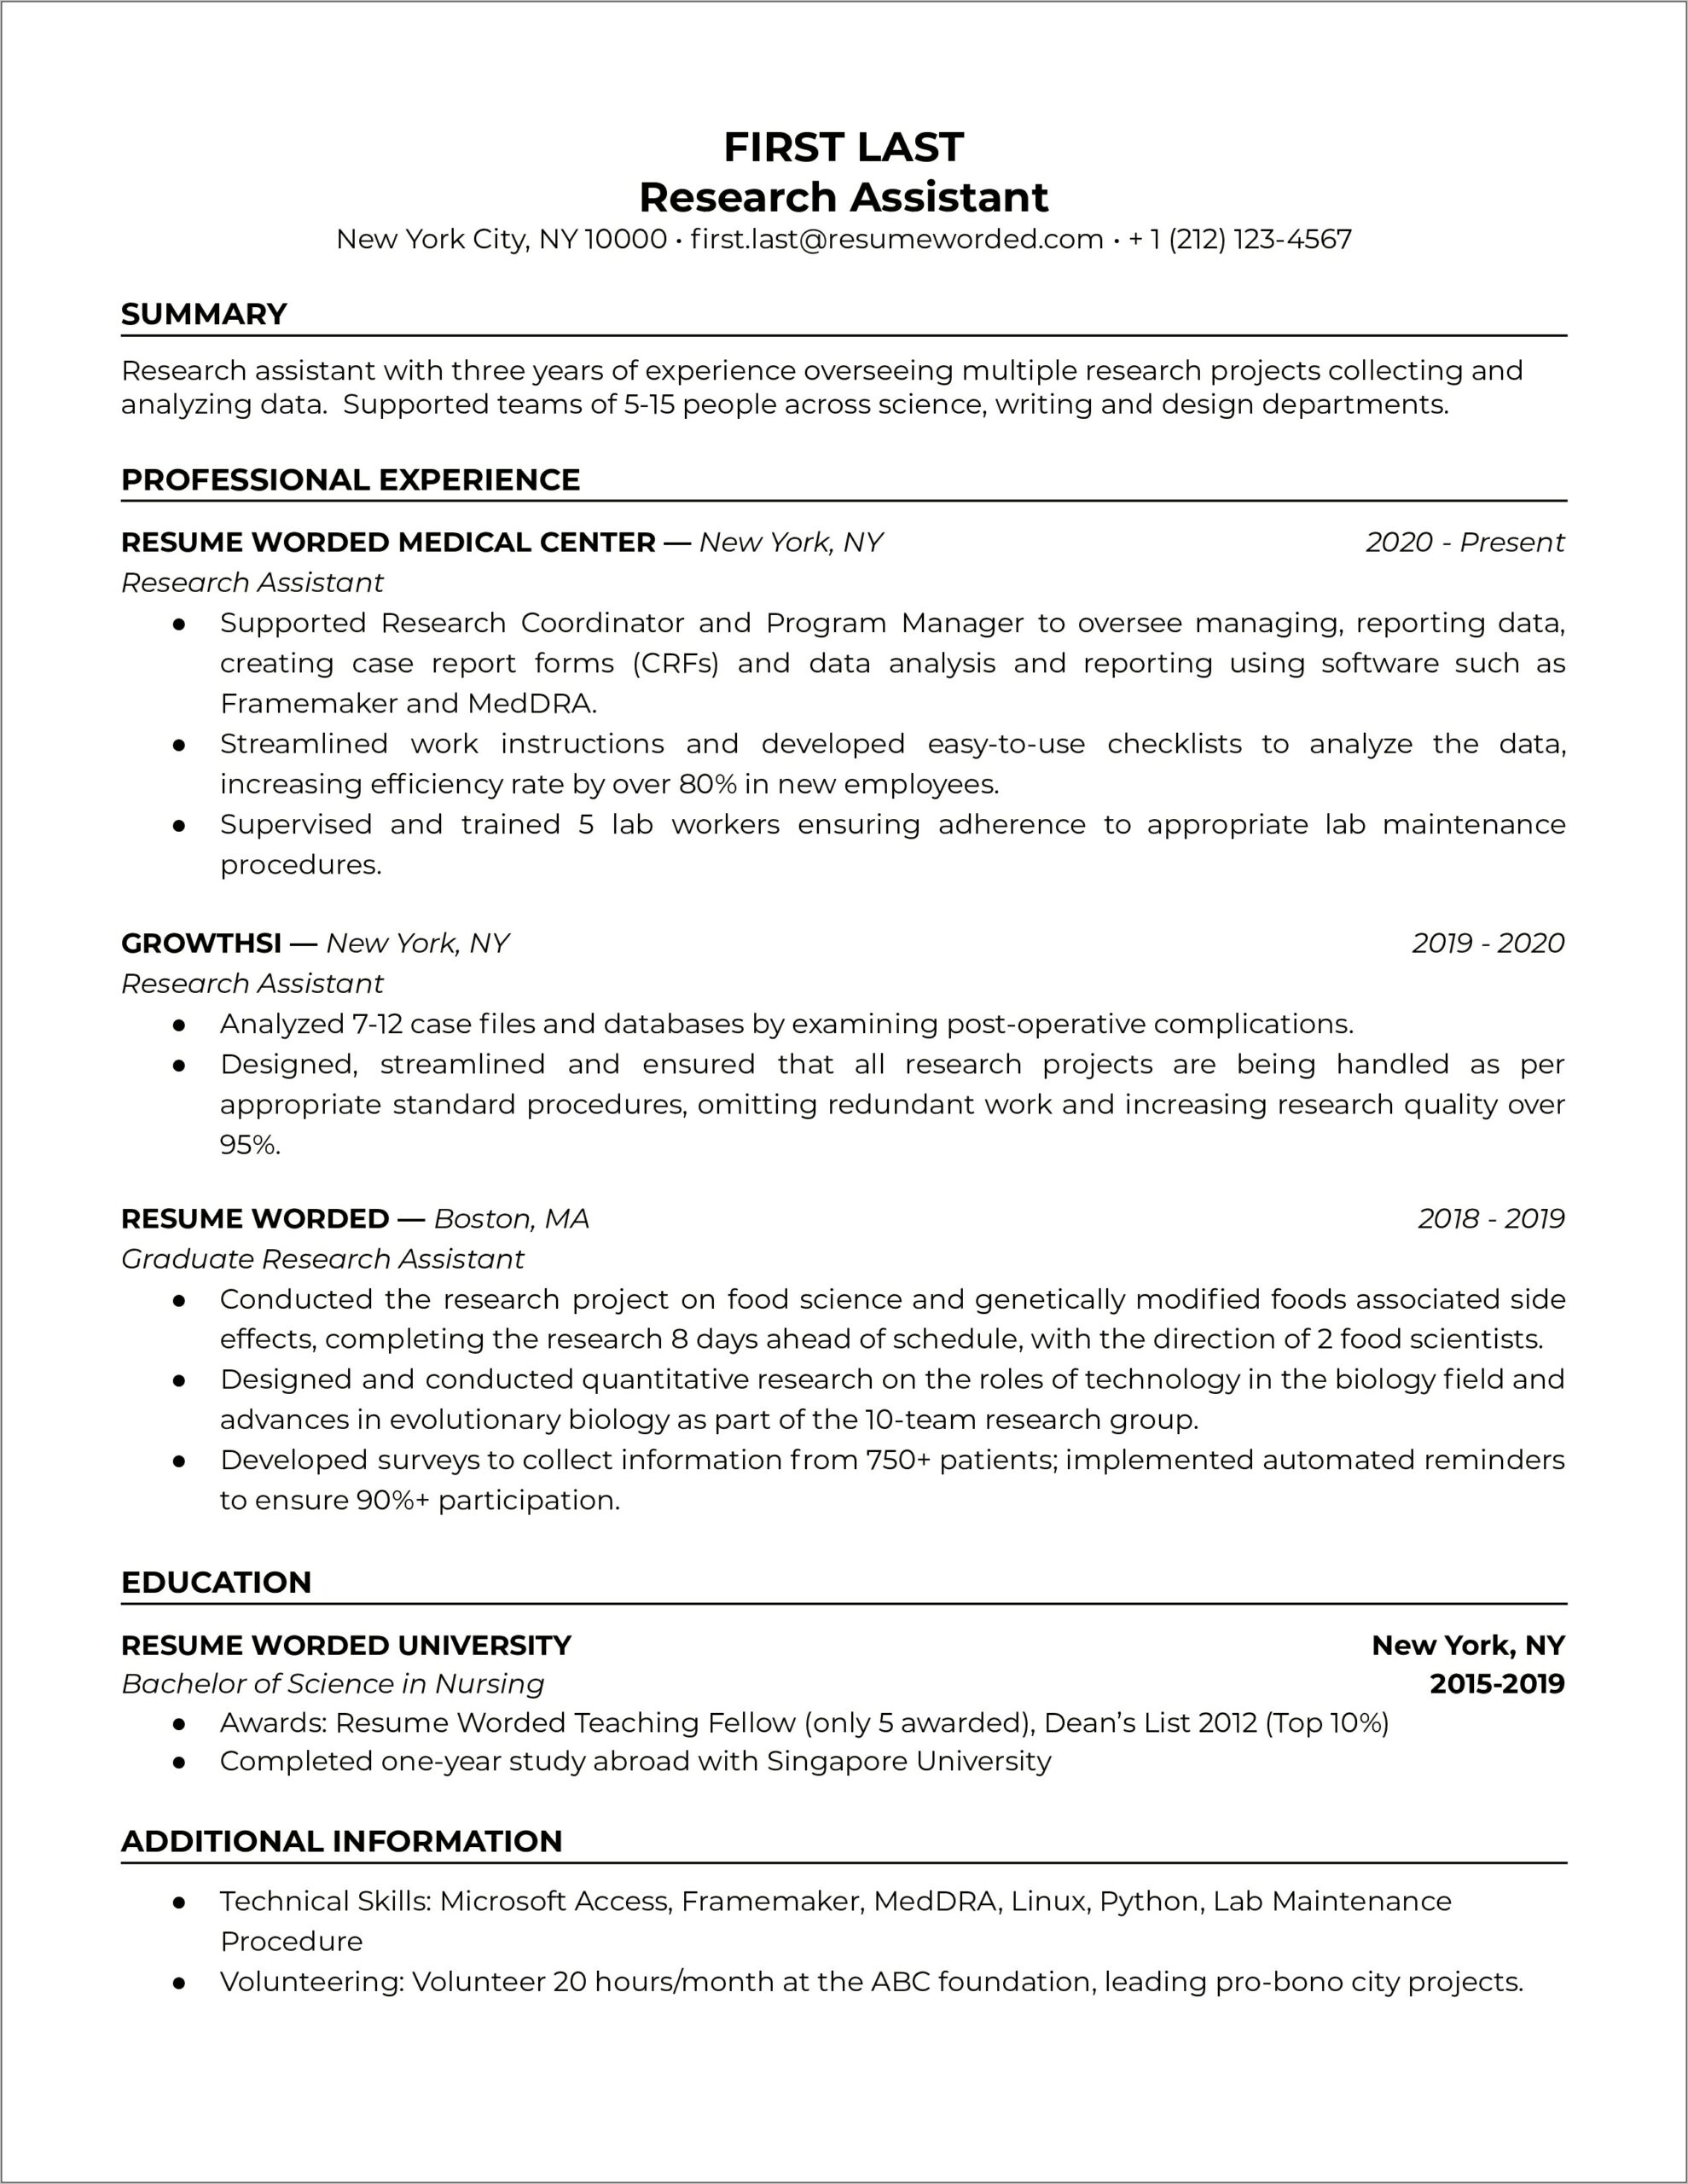 Resume Skill Academic Research Writing